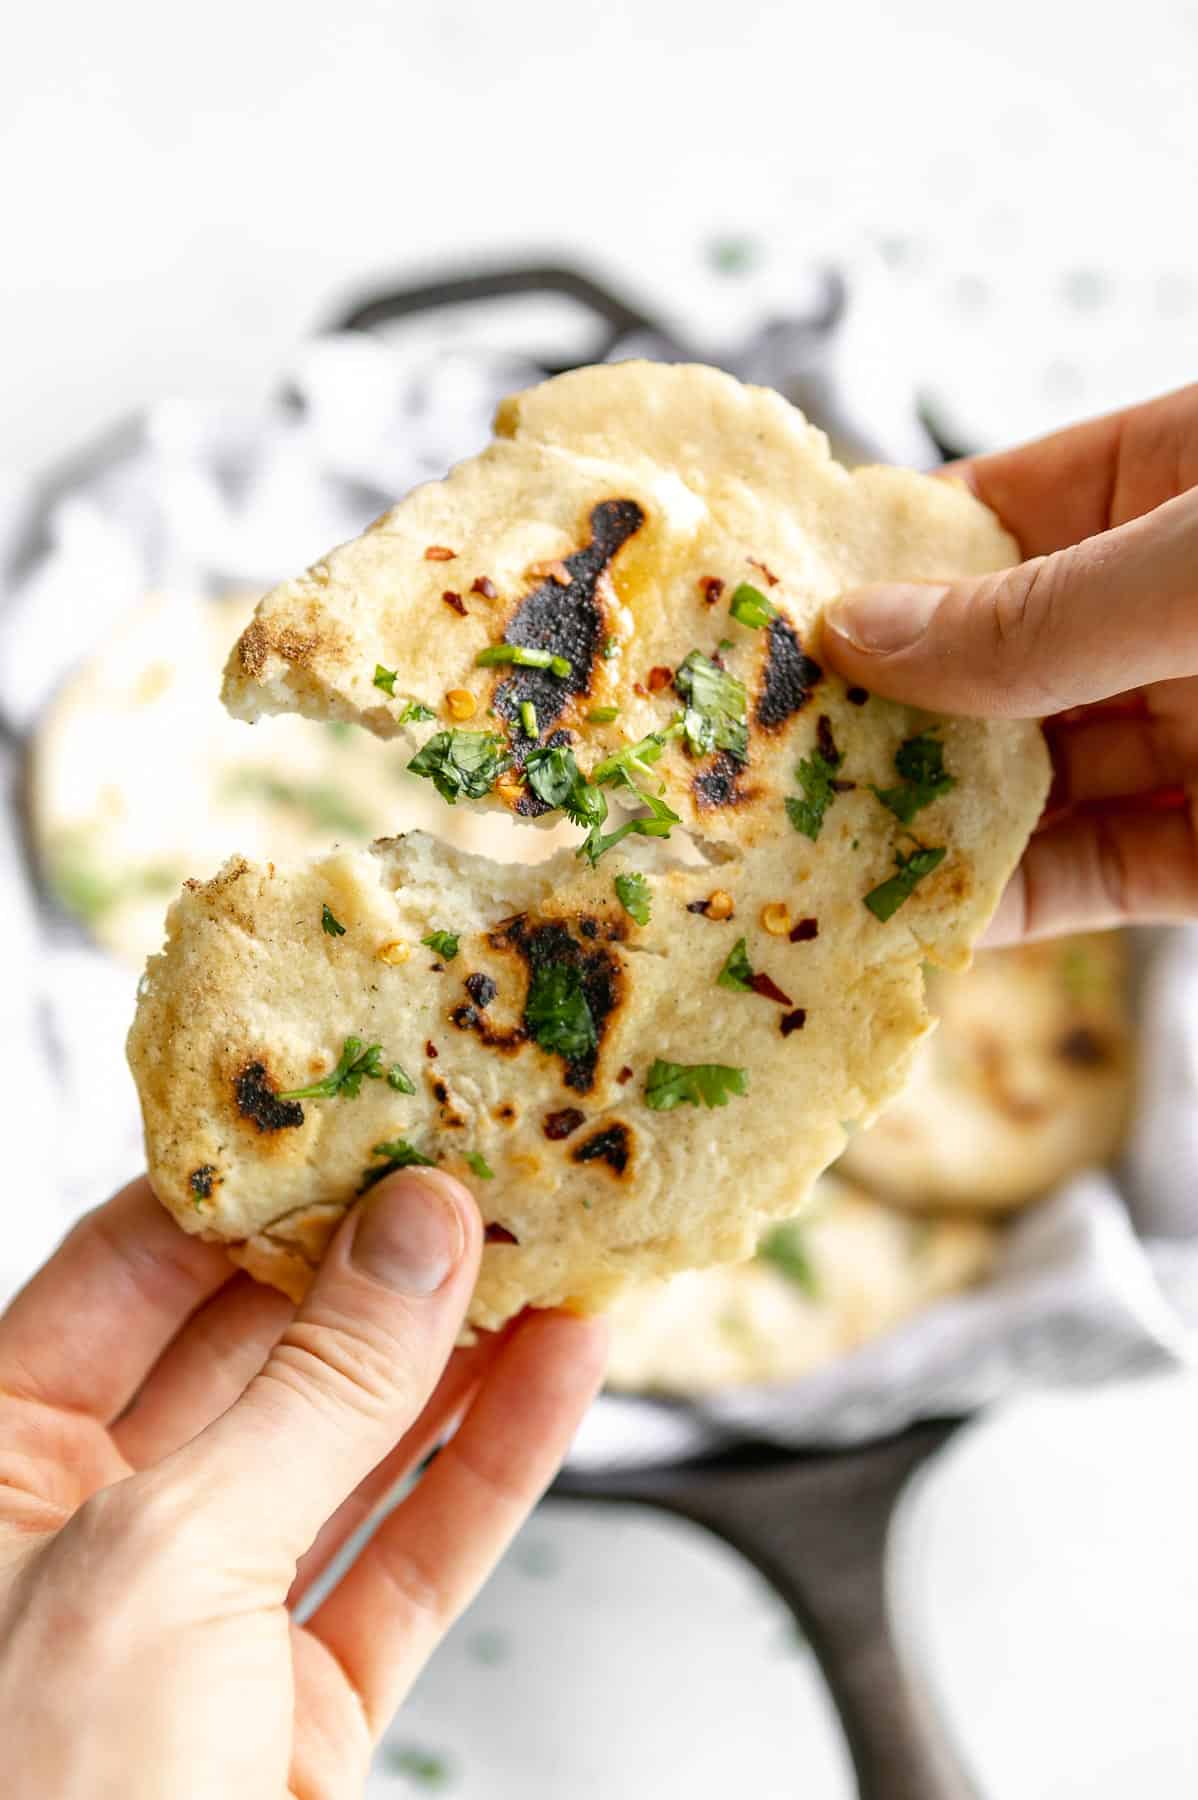 ripping apart a piece of the gluten free naan bread to show texture